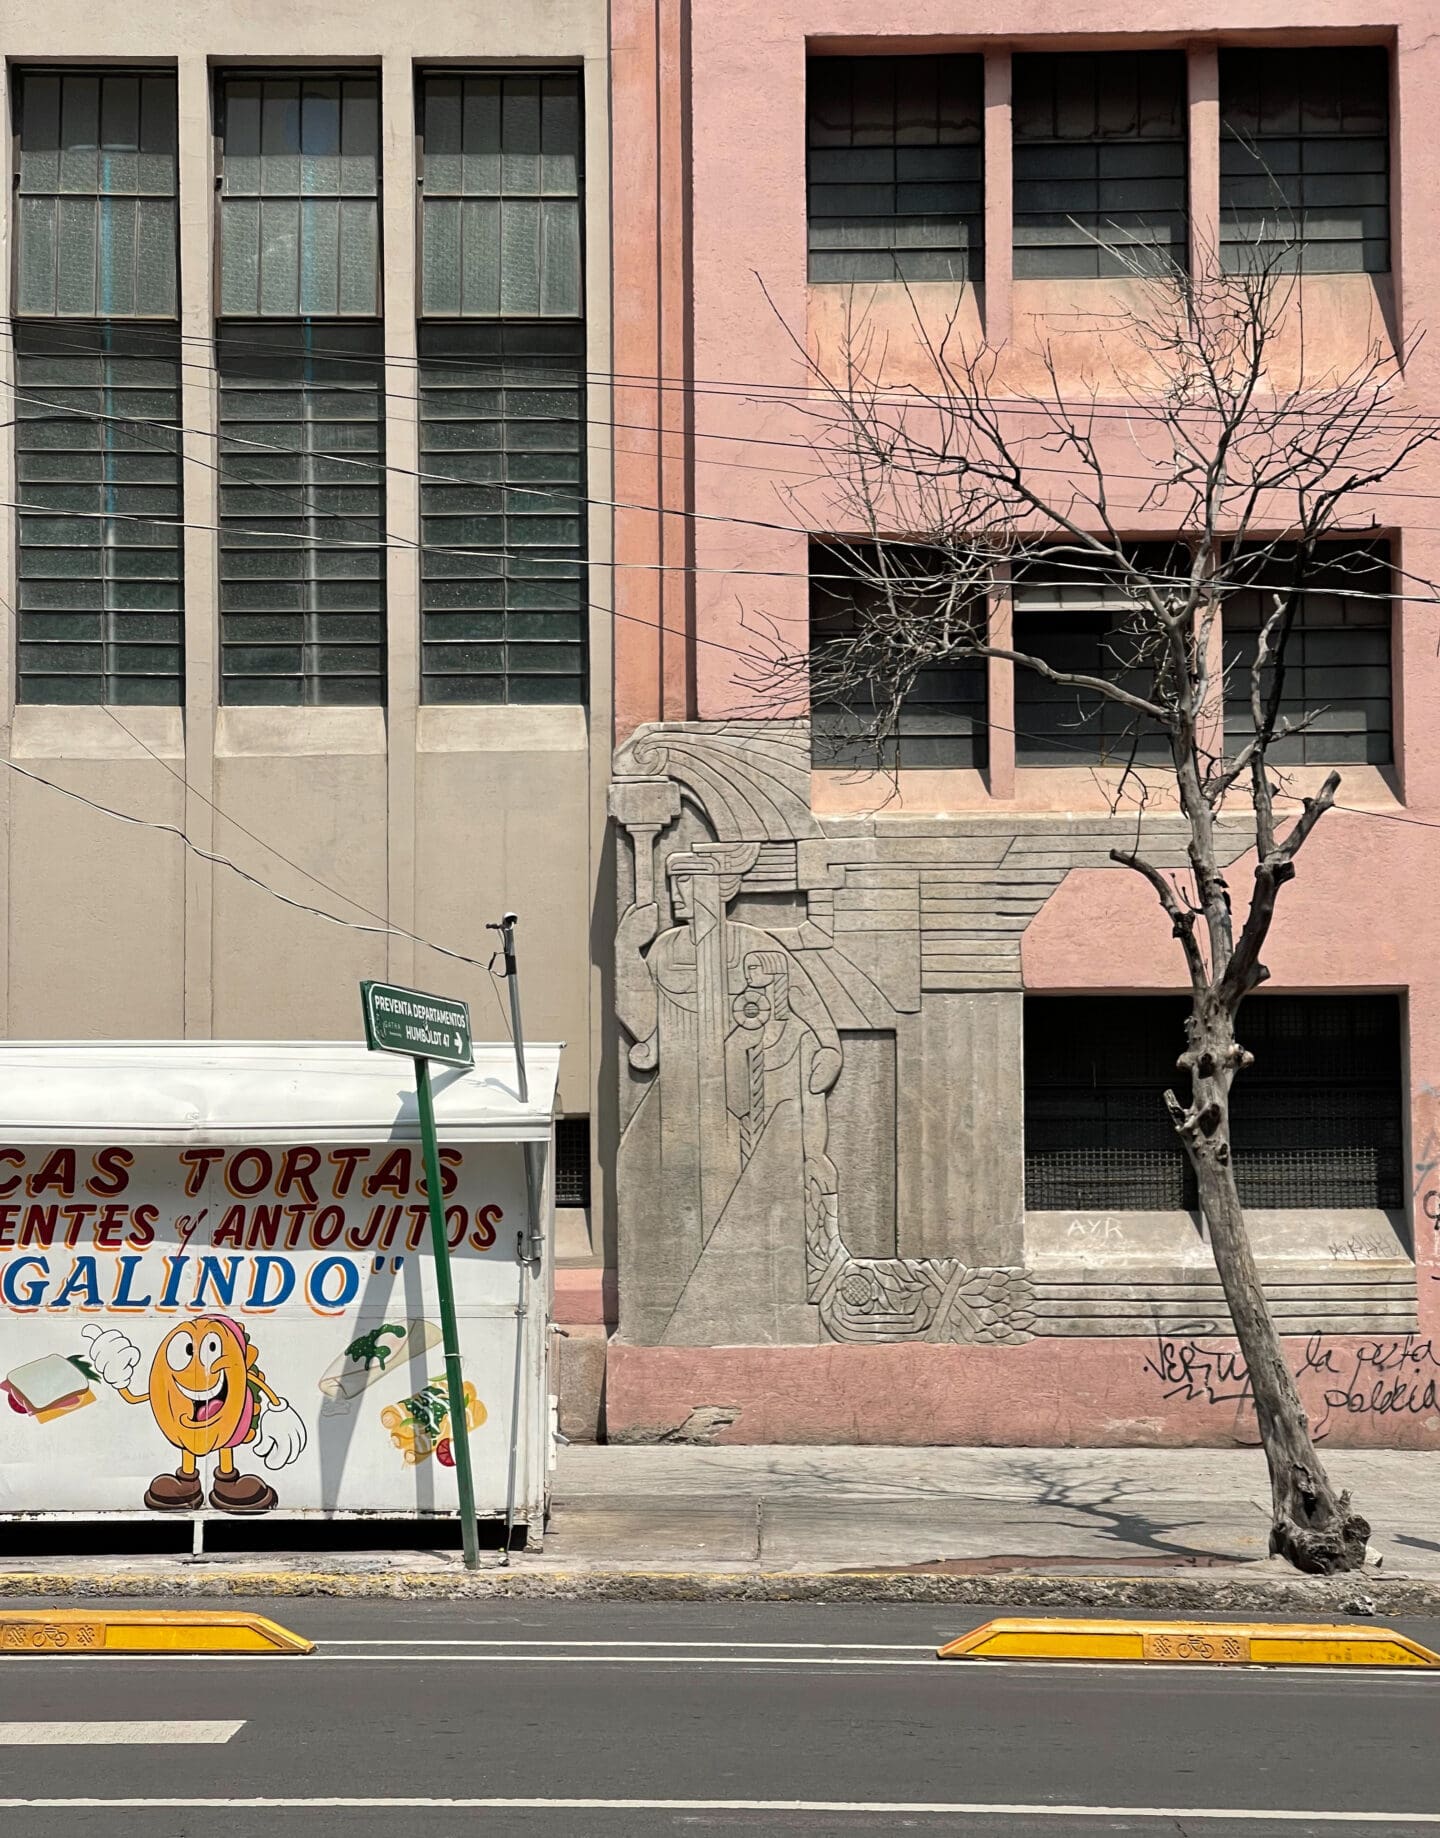 Photographer Manuel Zúñiga on Mexico City | A peach-pink stone building next to a grey stone building, with a bare-branched tree and a small food stall in front of them on a sidewalk